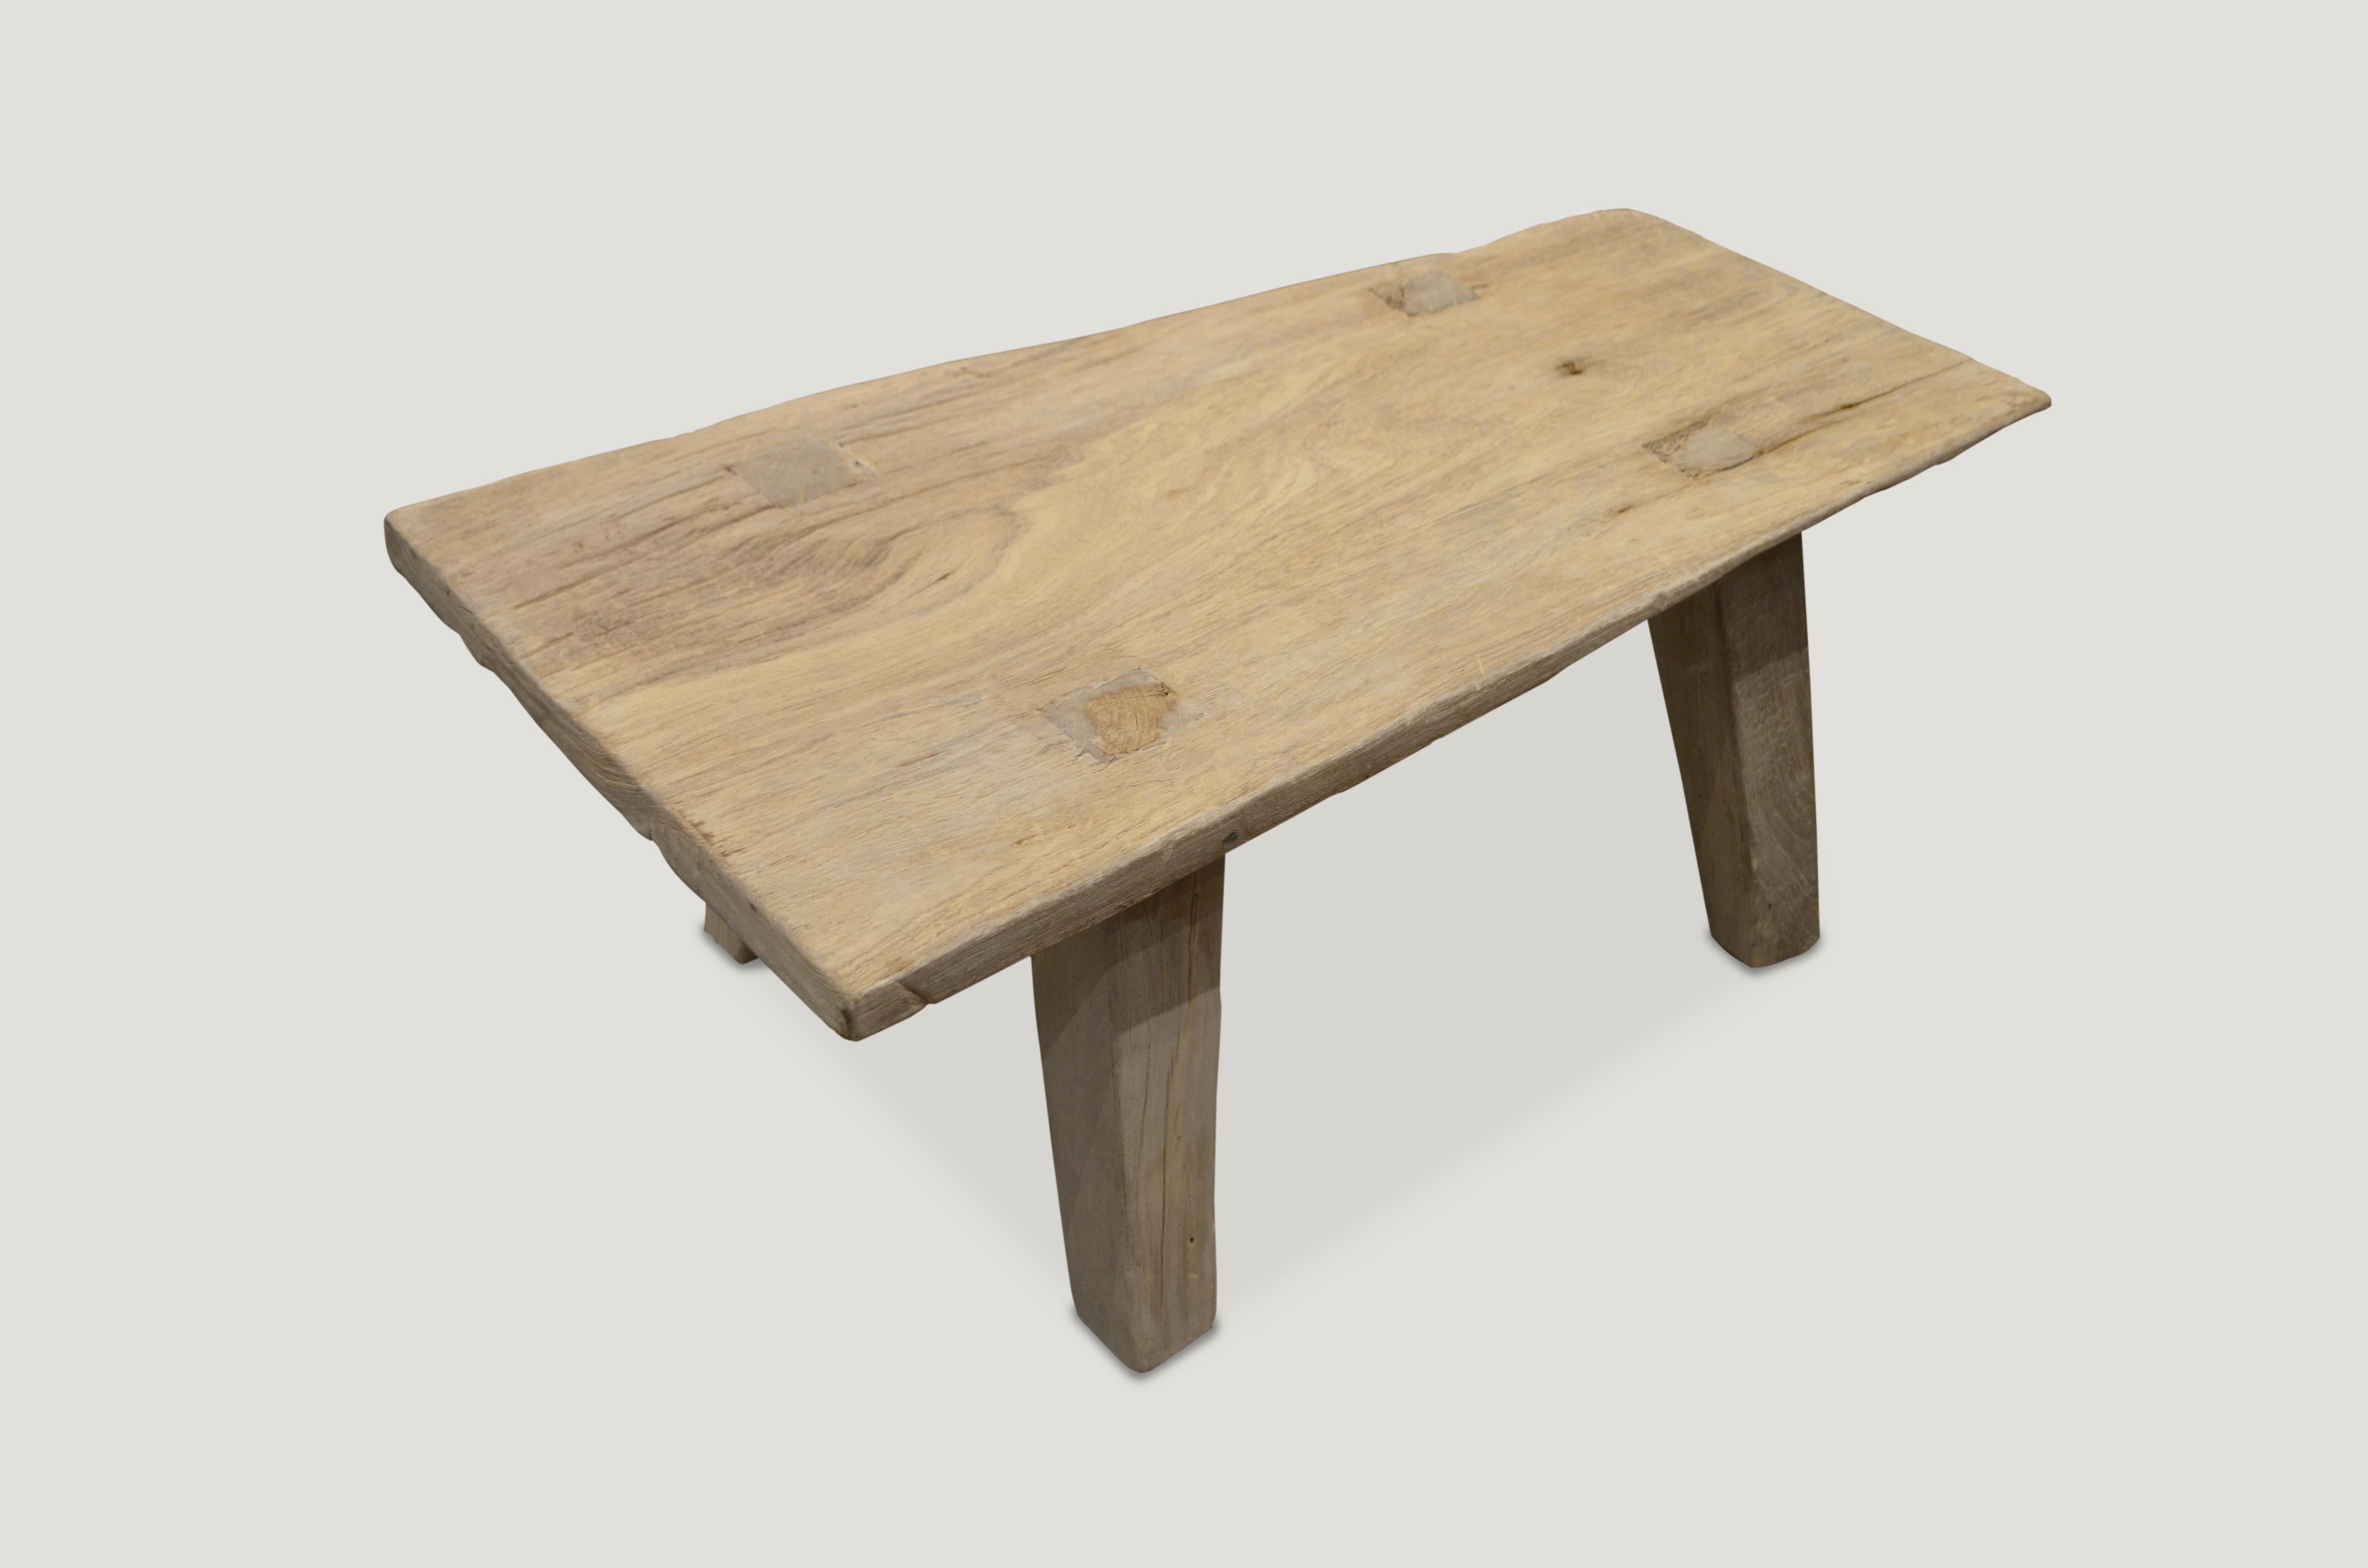 Reclaimed single slab bleached teak wood coffee table, side table or bench. Perfect for inside or outside living.

The St. Barts Collection features an exciting new line of organic white wash and natural weathered teak furniture. The reclaimed